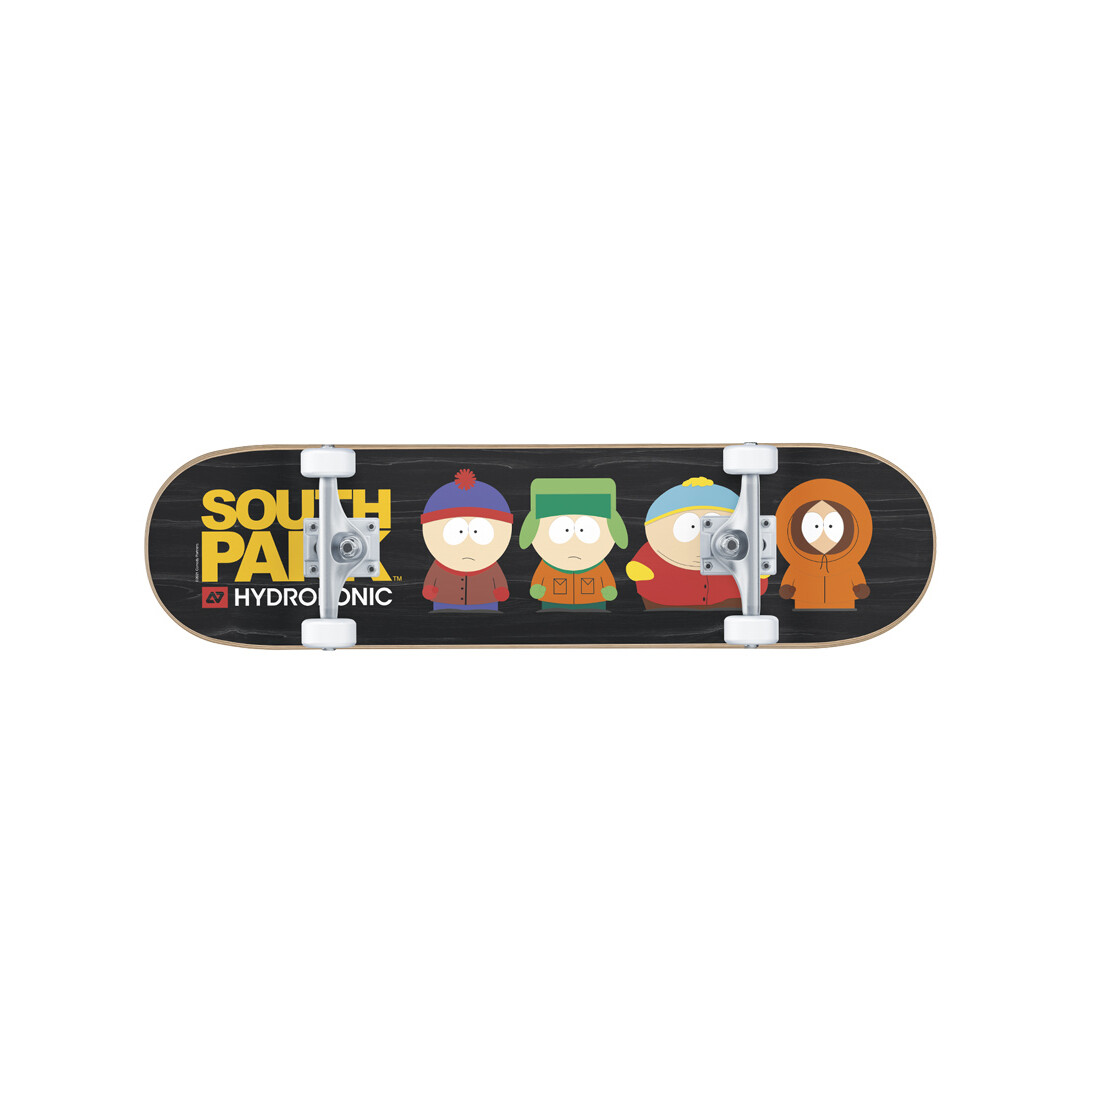 Hydroponic South Park Gang 8.0" compleet skateboard